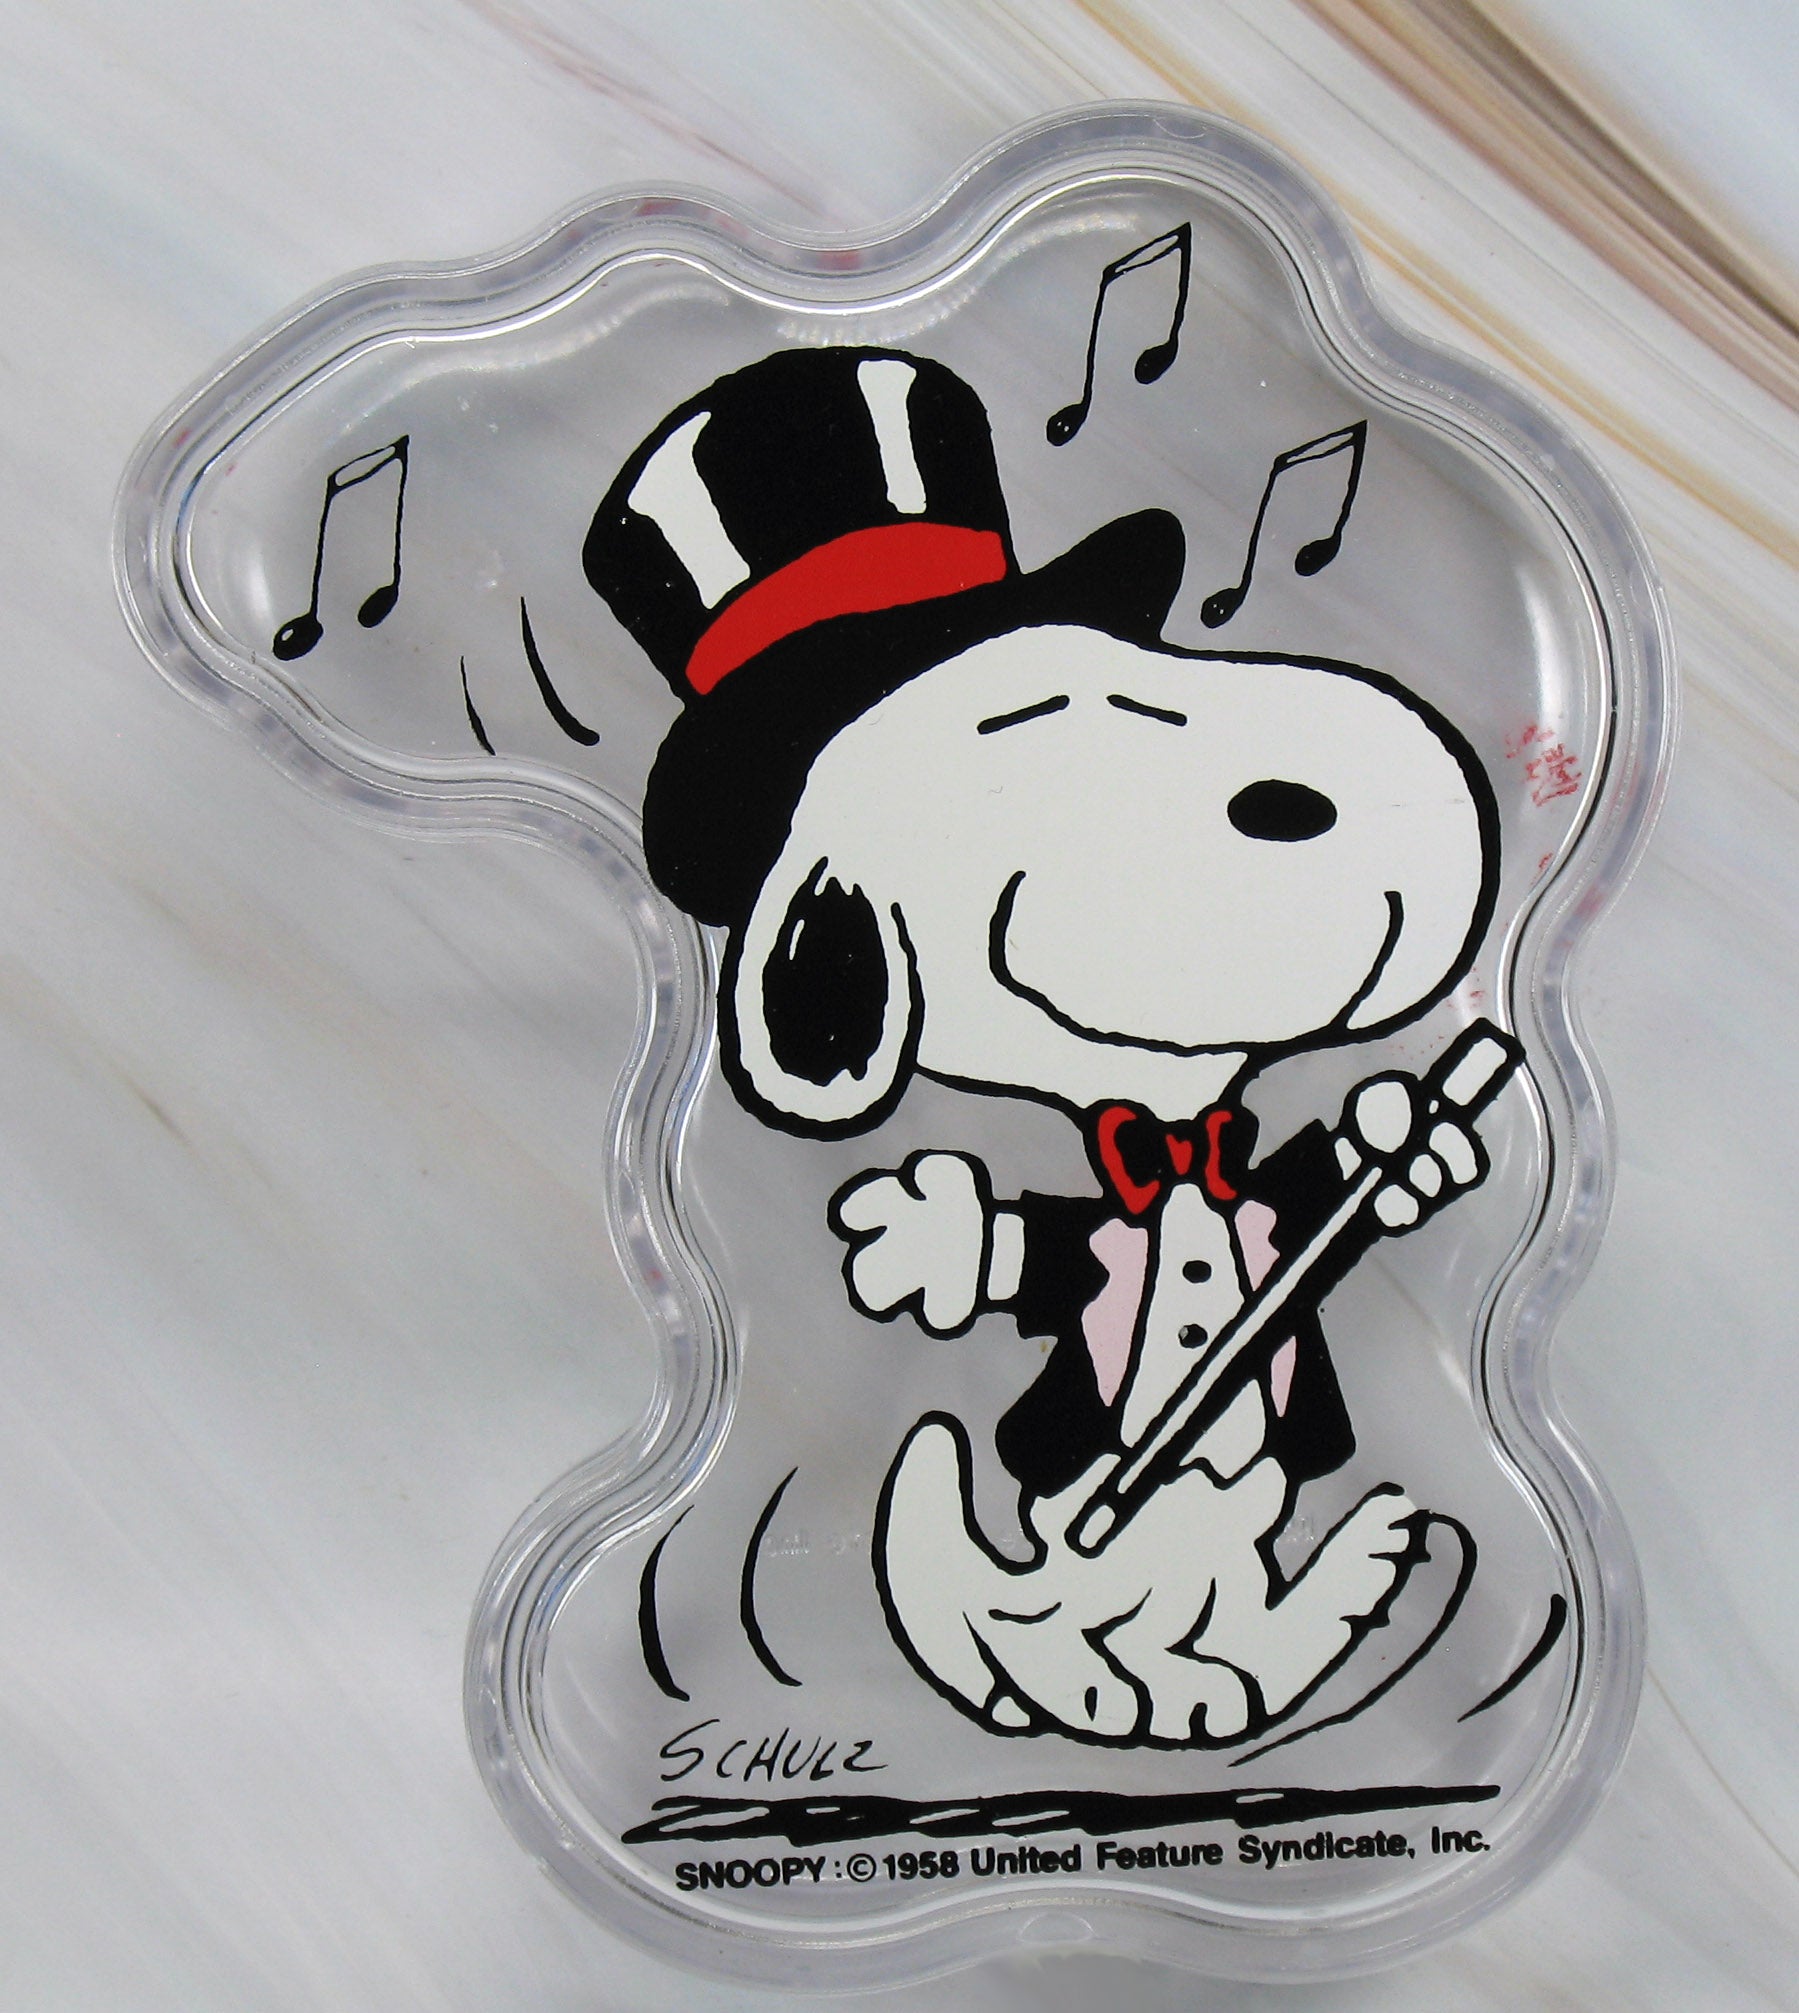 Snoopy Candy